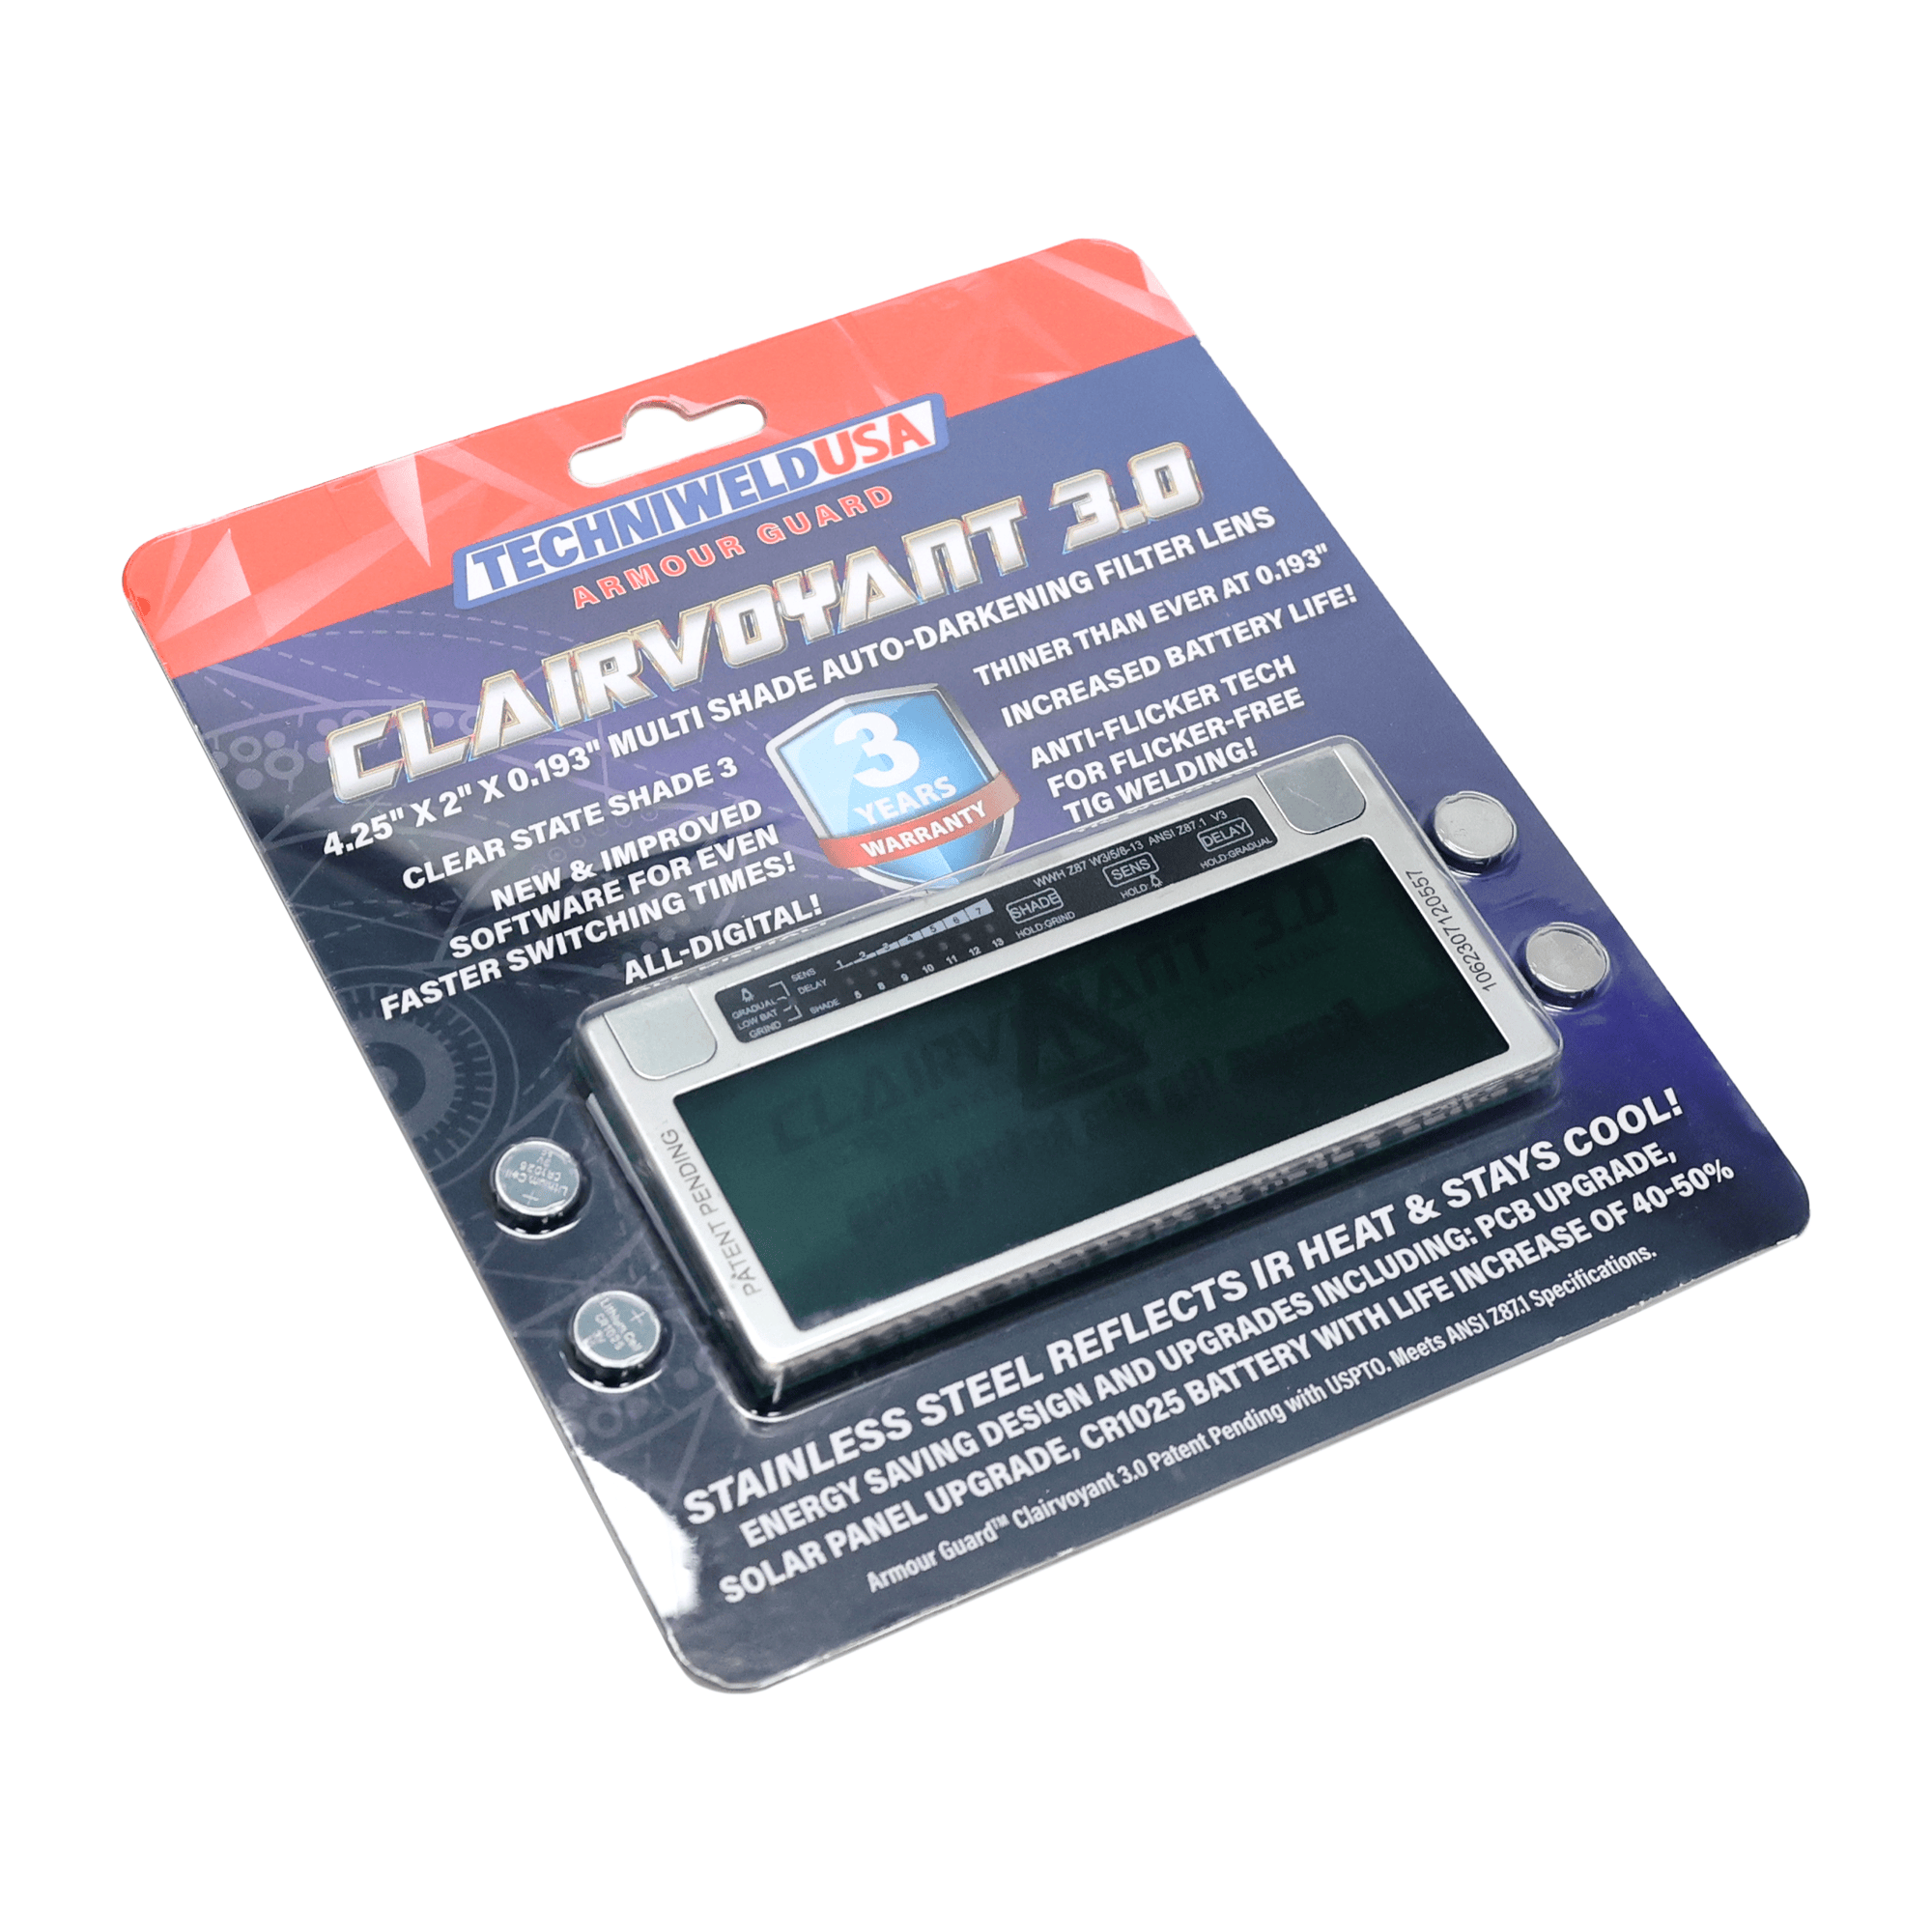 Armour Guard Clairvoyant 3.0 - Crystal Clear Blue View 2 x 4 1/4 Multi  Shade Auto-Darkening Filter Lens